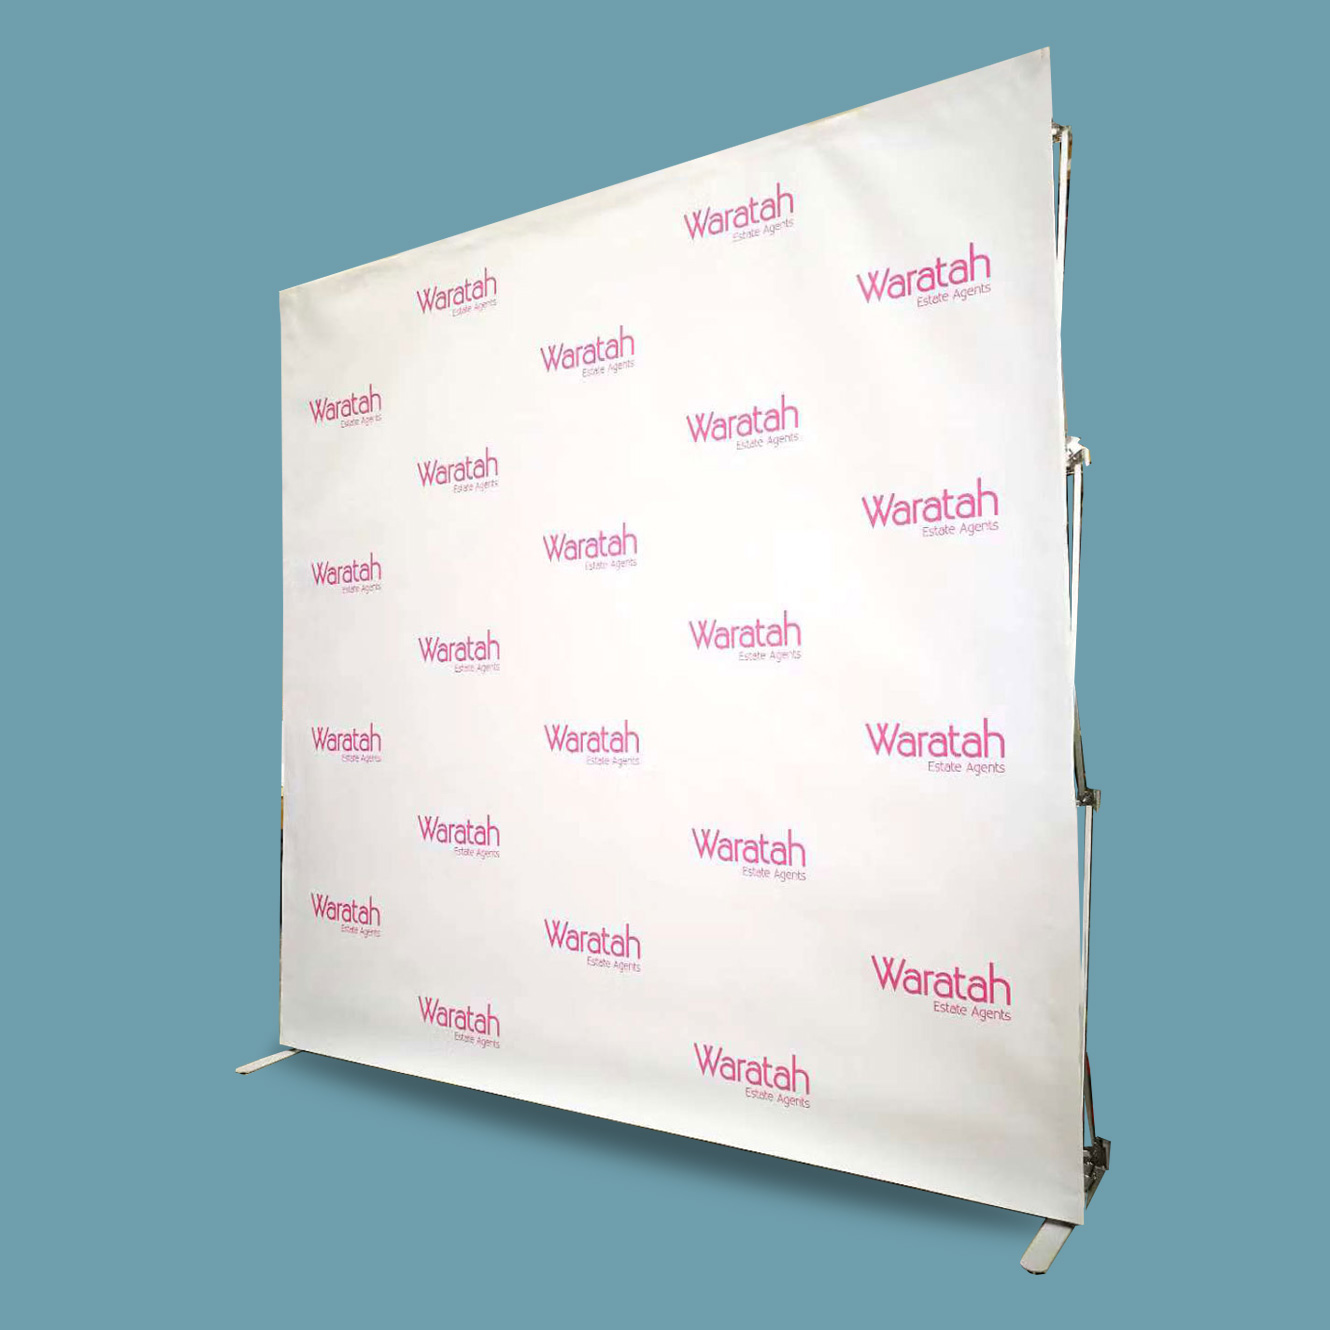 https://bigbanner.com.au/wp-content/uploads/2020/01/Fabric-Popup-Wall-Sides-Non-Graphic-6-1.jpg